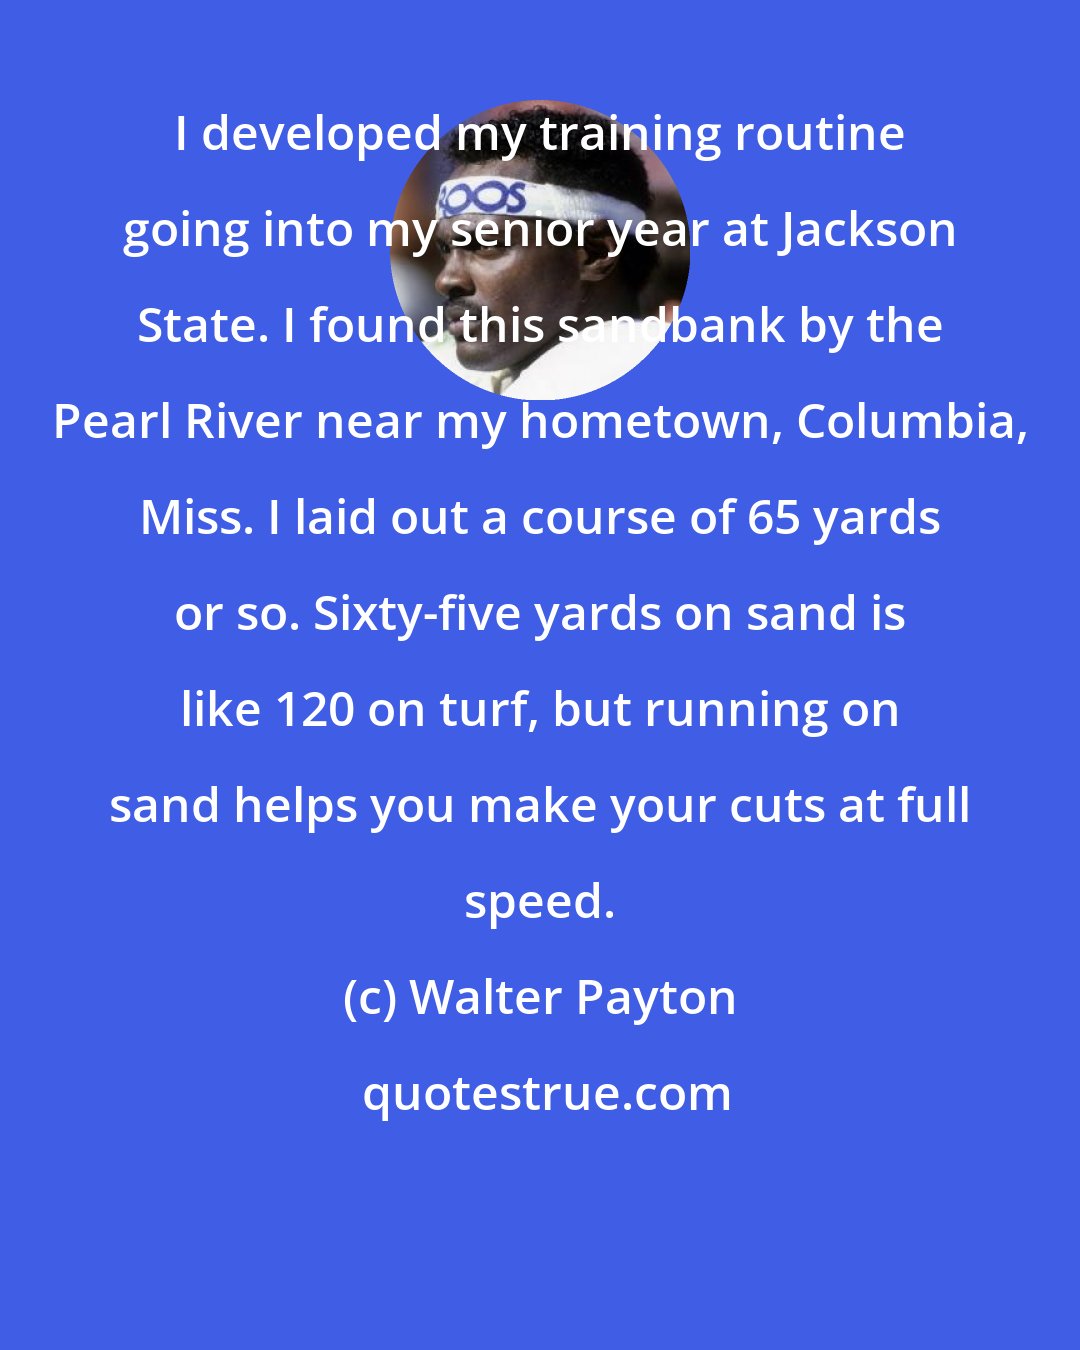 Walter Payton: I developed my training routine going into my senior year at Jackson State. I found this sandbank by the Pearl River near my hometown, Columbia, Miss. I laid out a course of 65 yards or so. Sixty-five yards on sand is like 120 on turf, but running on sand helps you make your cuts at full speed.